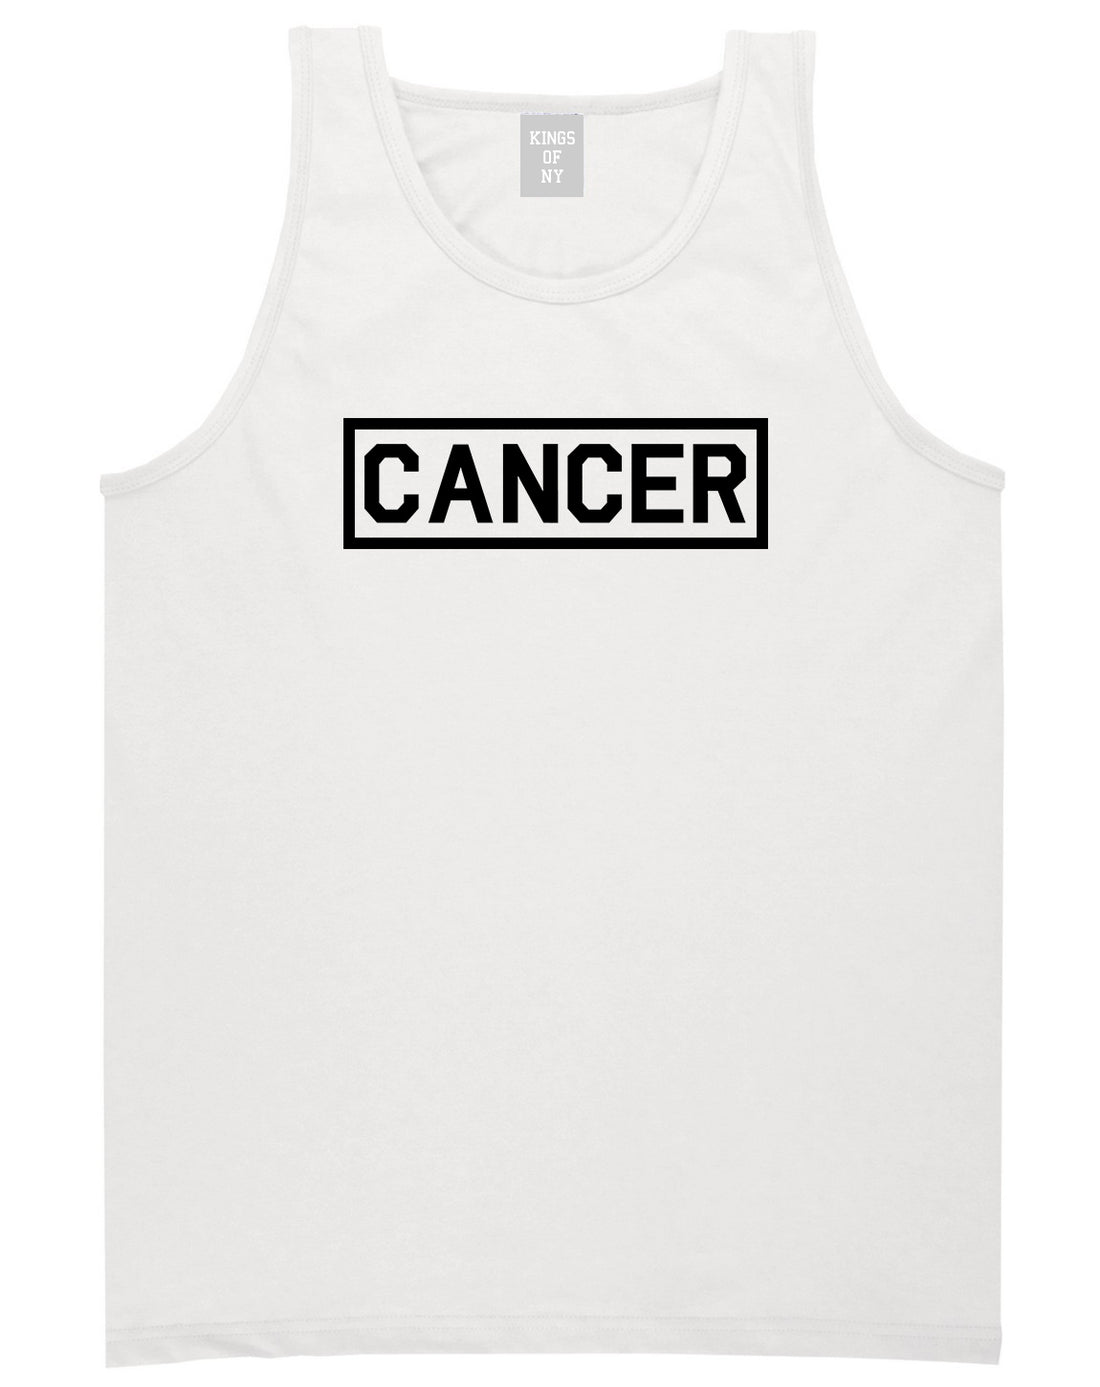 Cancer Horoscope Sign Mens White Tank Top Shirt by KINGS OF NY